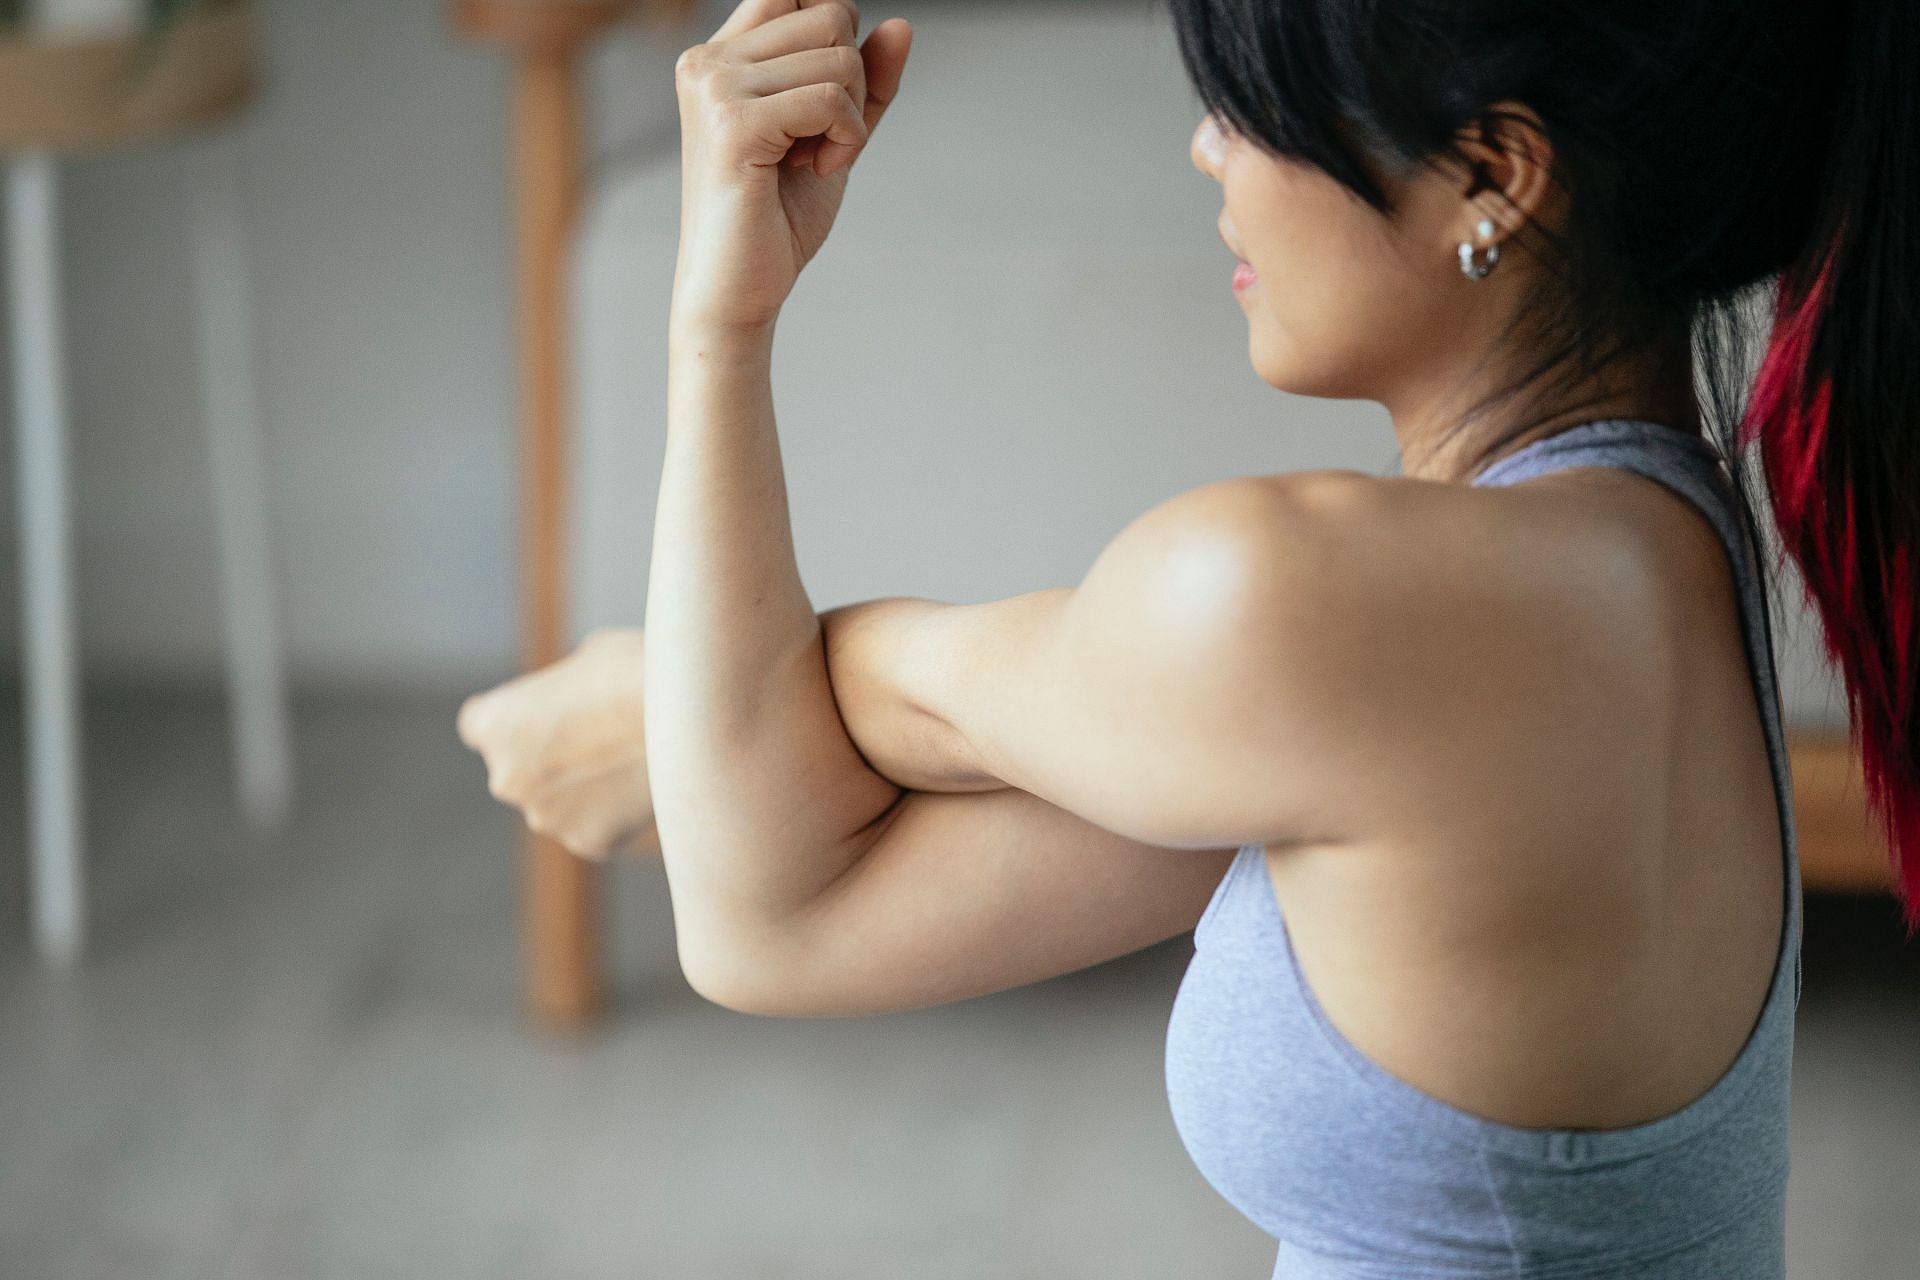 Some effective exercises can help relieve the shoulder pain (Image via Miriam Alonso/Pexels)